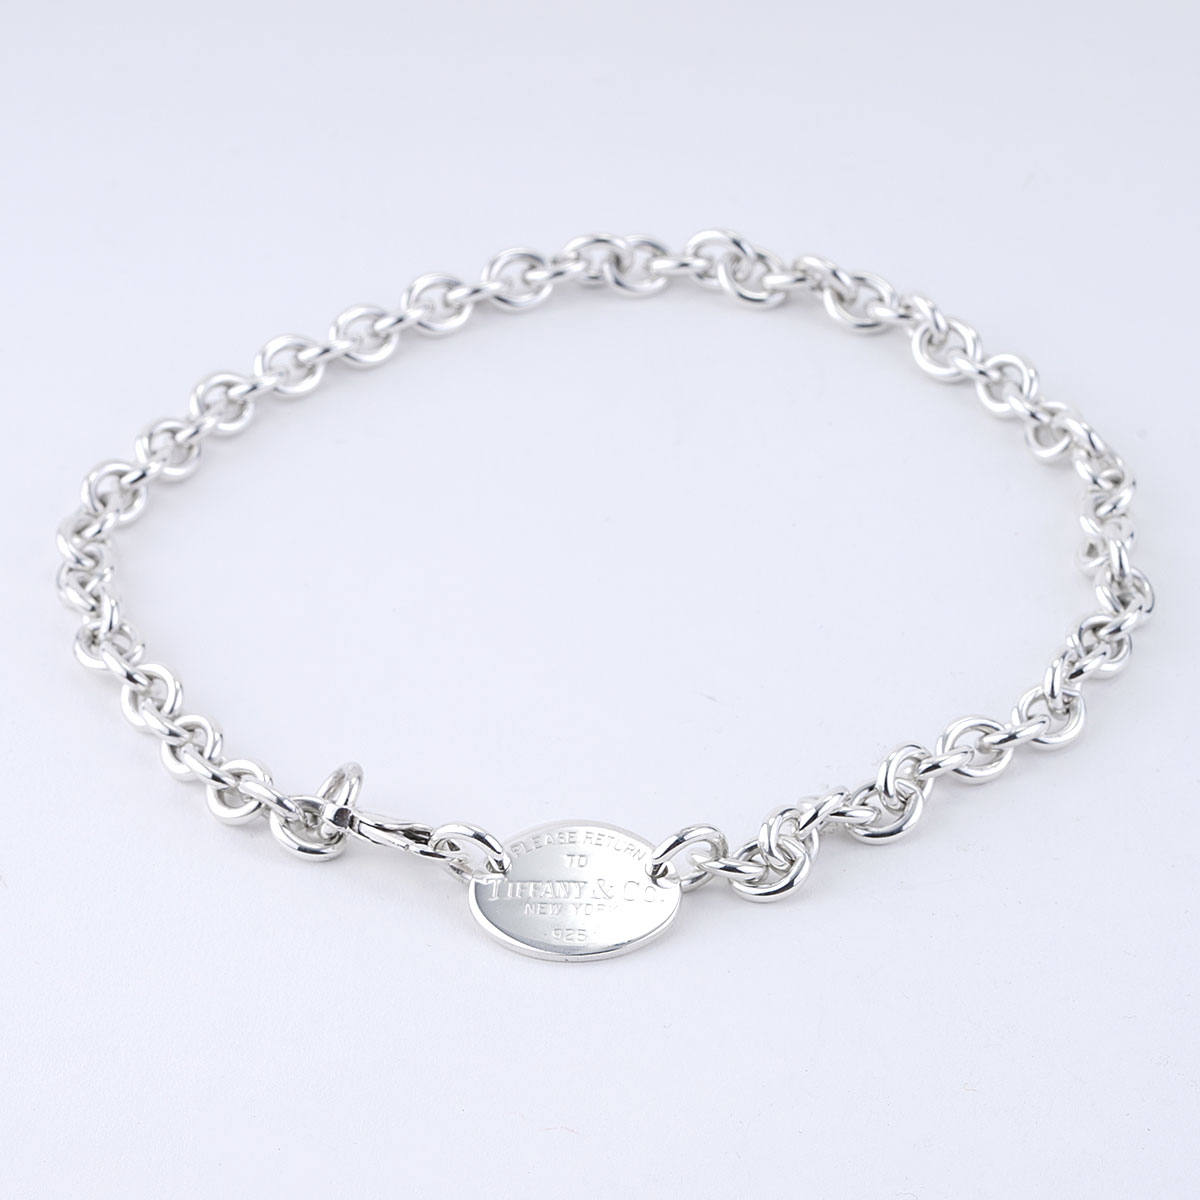 return to tiffany co oval tag choker necklace in silver 13347 79